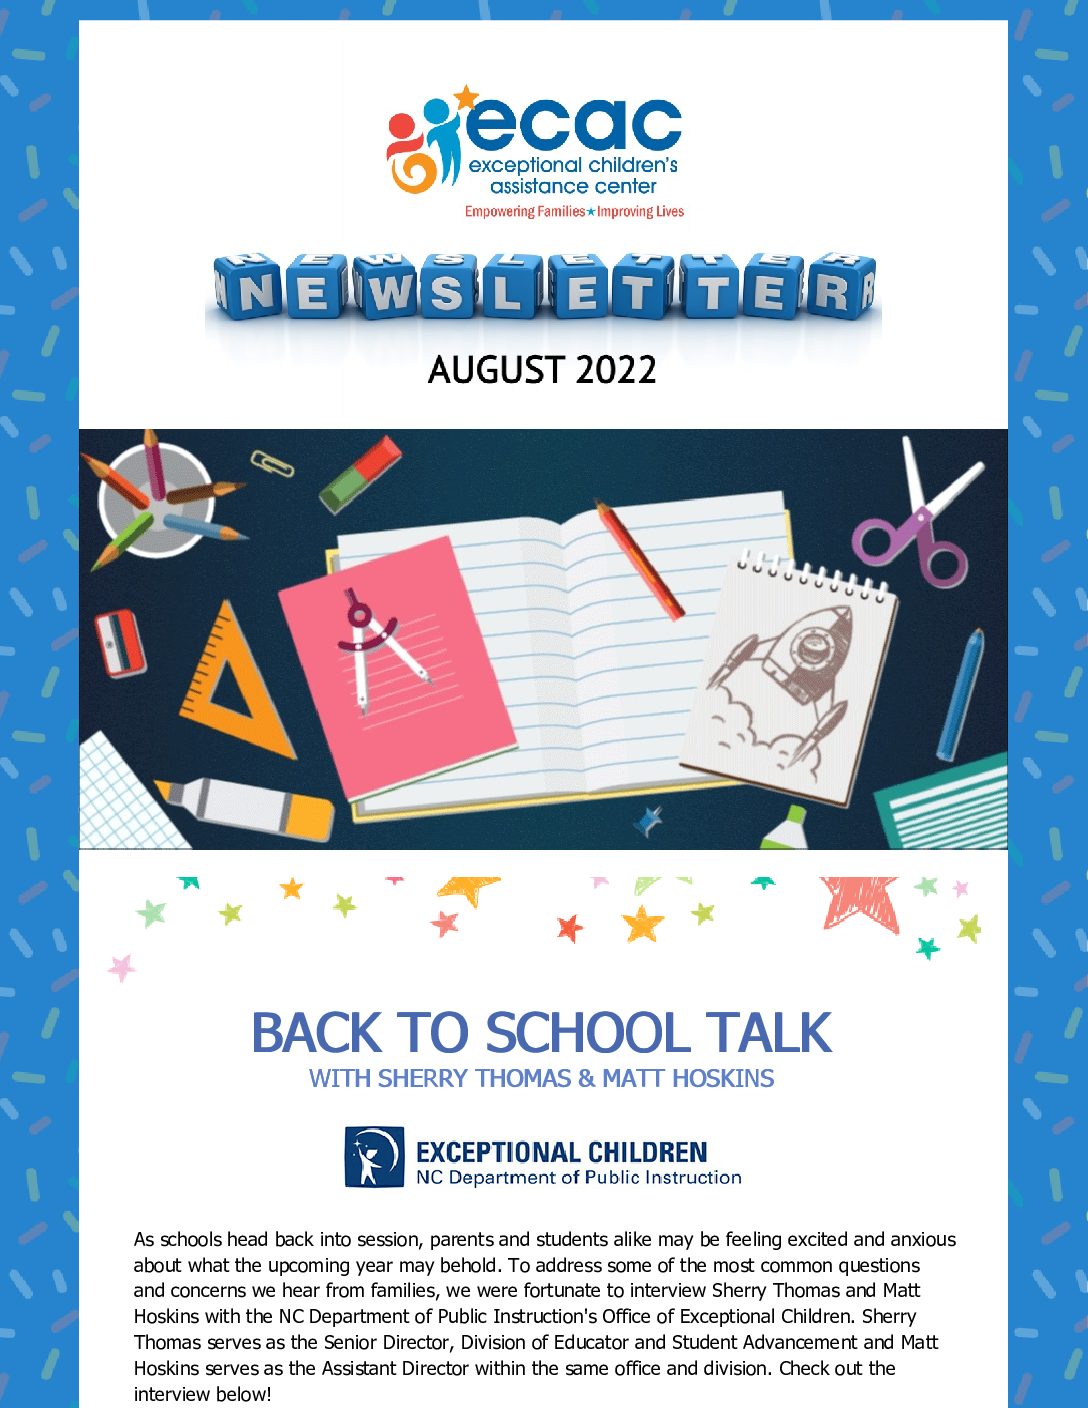 BACK to SCHOOL August 2022